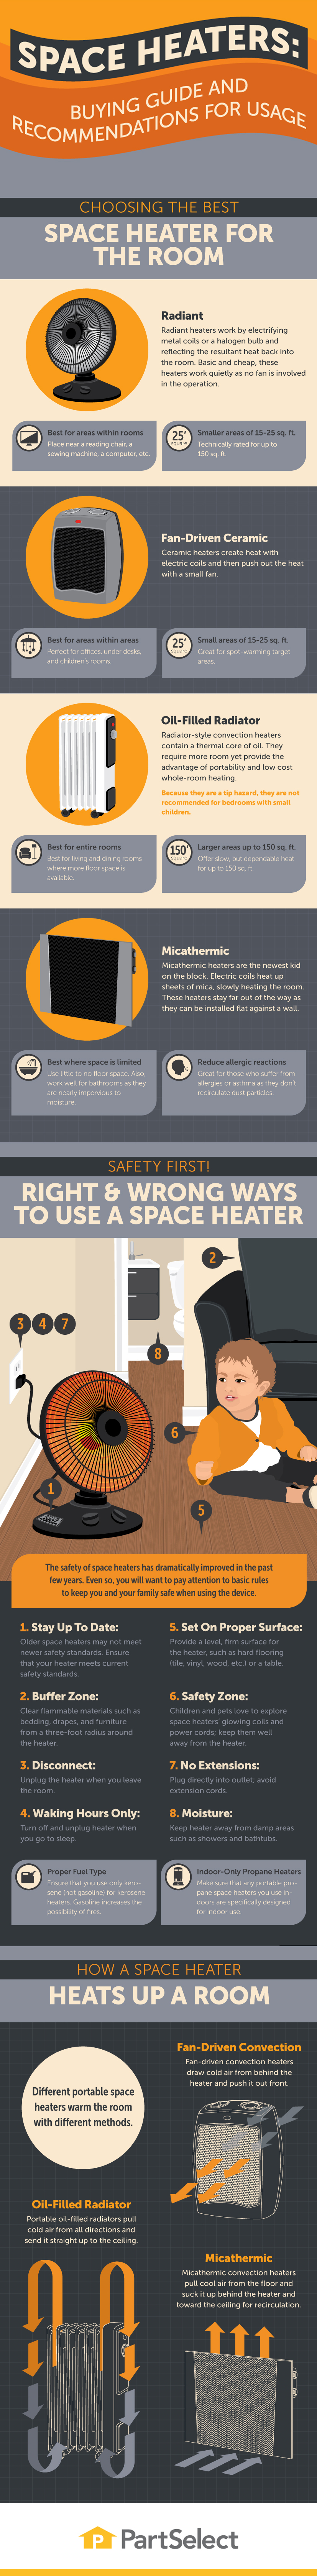 Everything You Want to Know About a Space Heater - Infographic